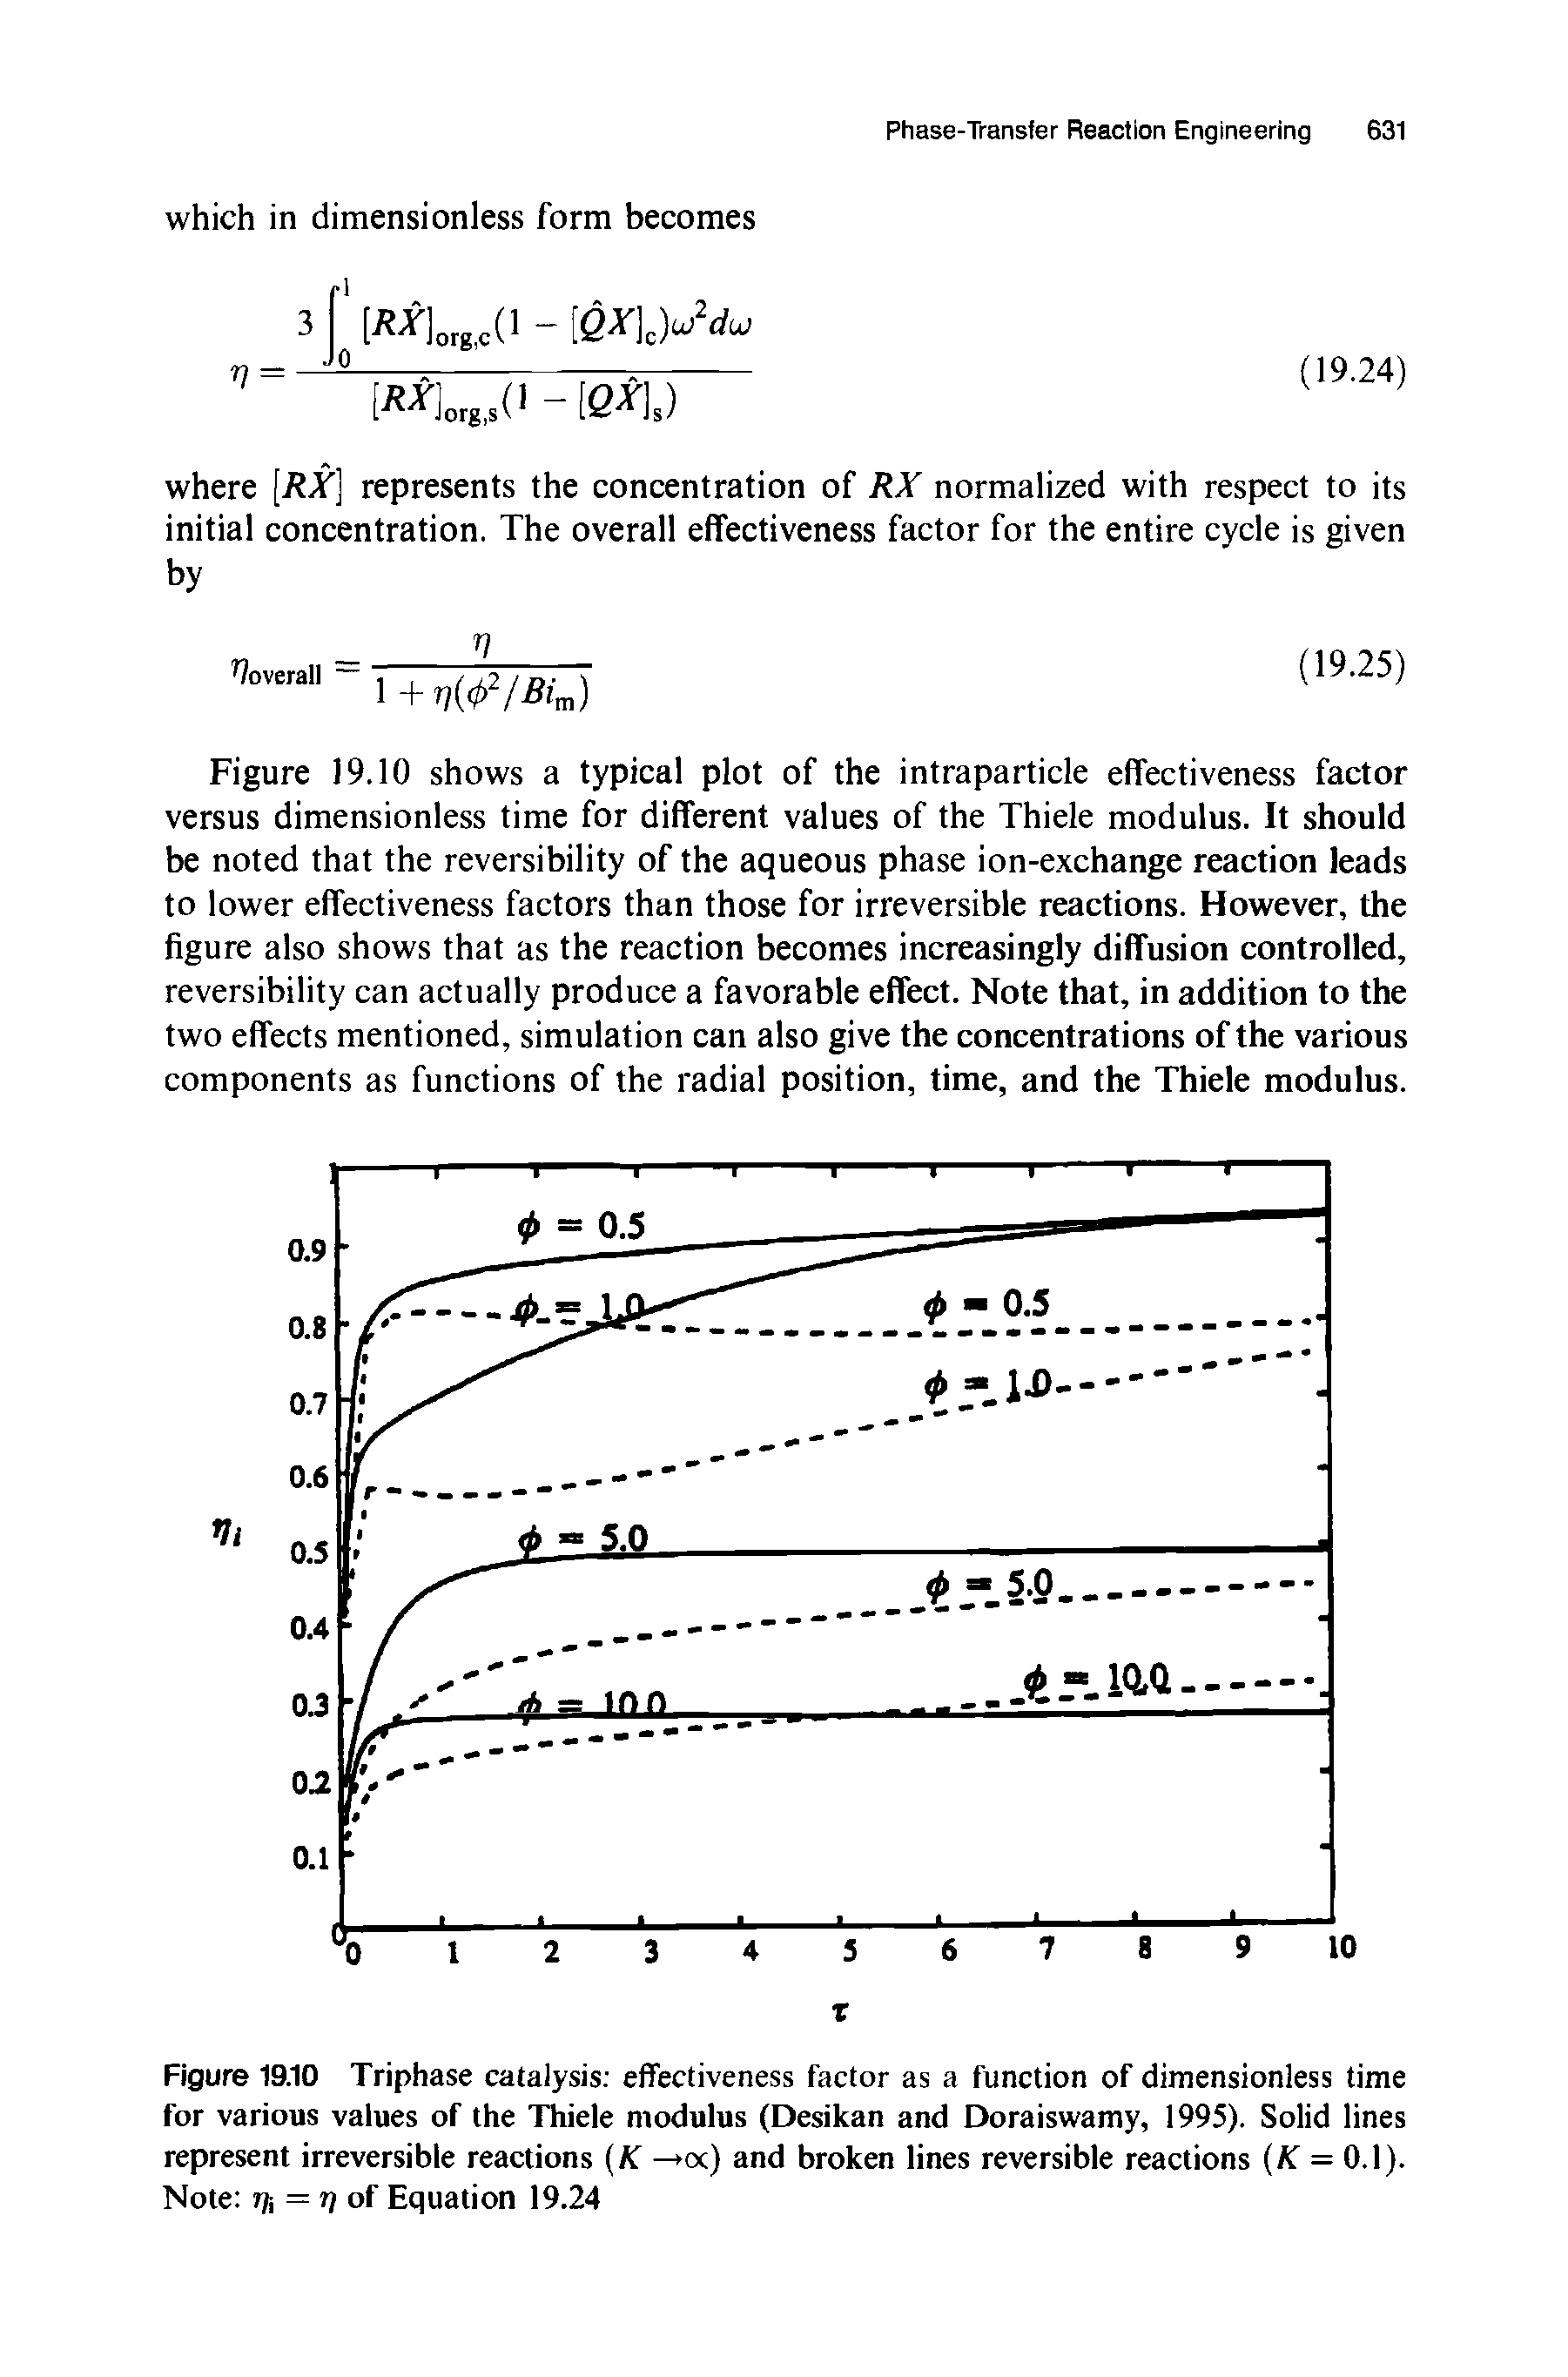 Figure 19.10 Triphase catalysis effectiveness factor as a function of dimensionless time for various values of the Thiele modulus (Desikan and Doraiswamy, 1995). Solid lines represent irreversible reactions K —xx) and broken lines reversible reactions (AT = 0.1). Note T]i=T of Equation 19.24...